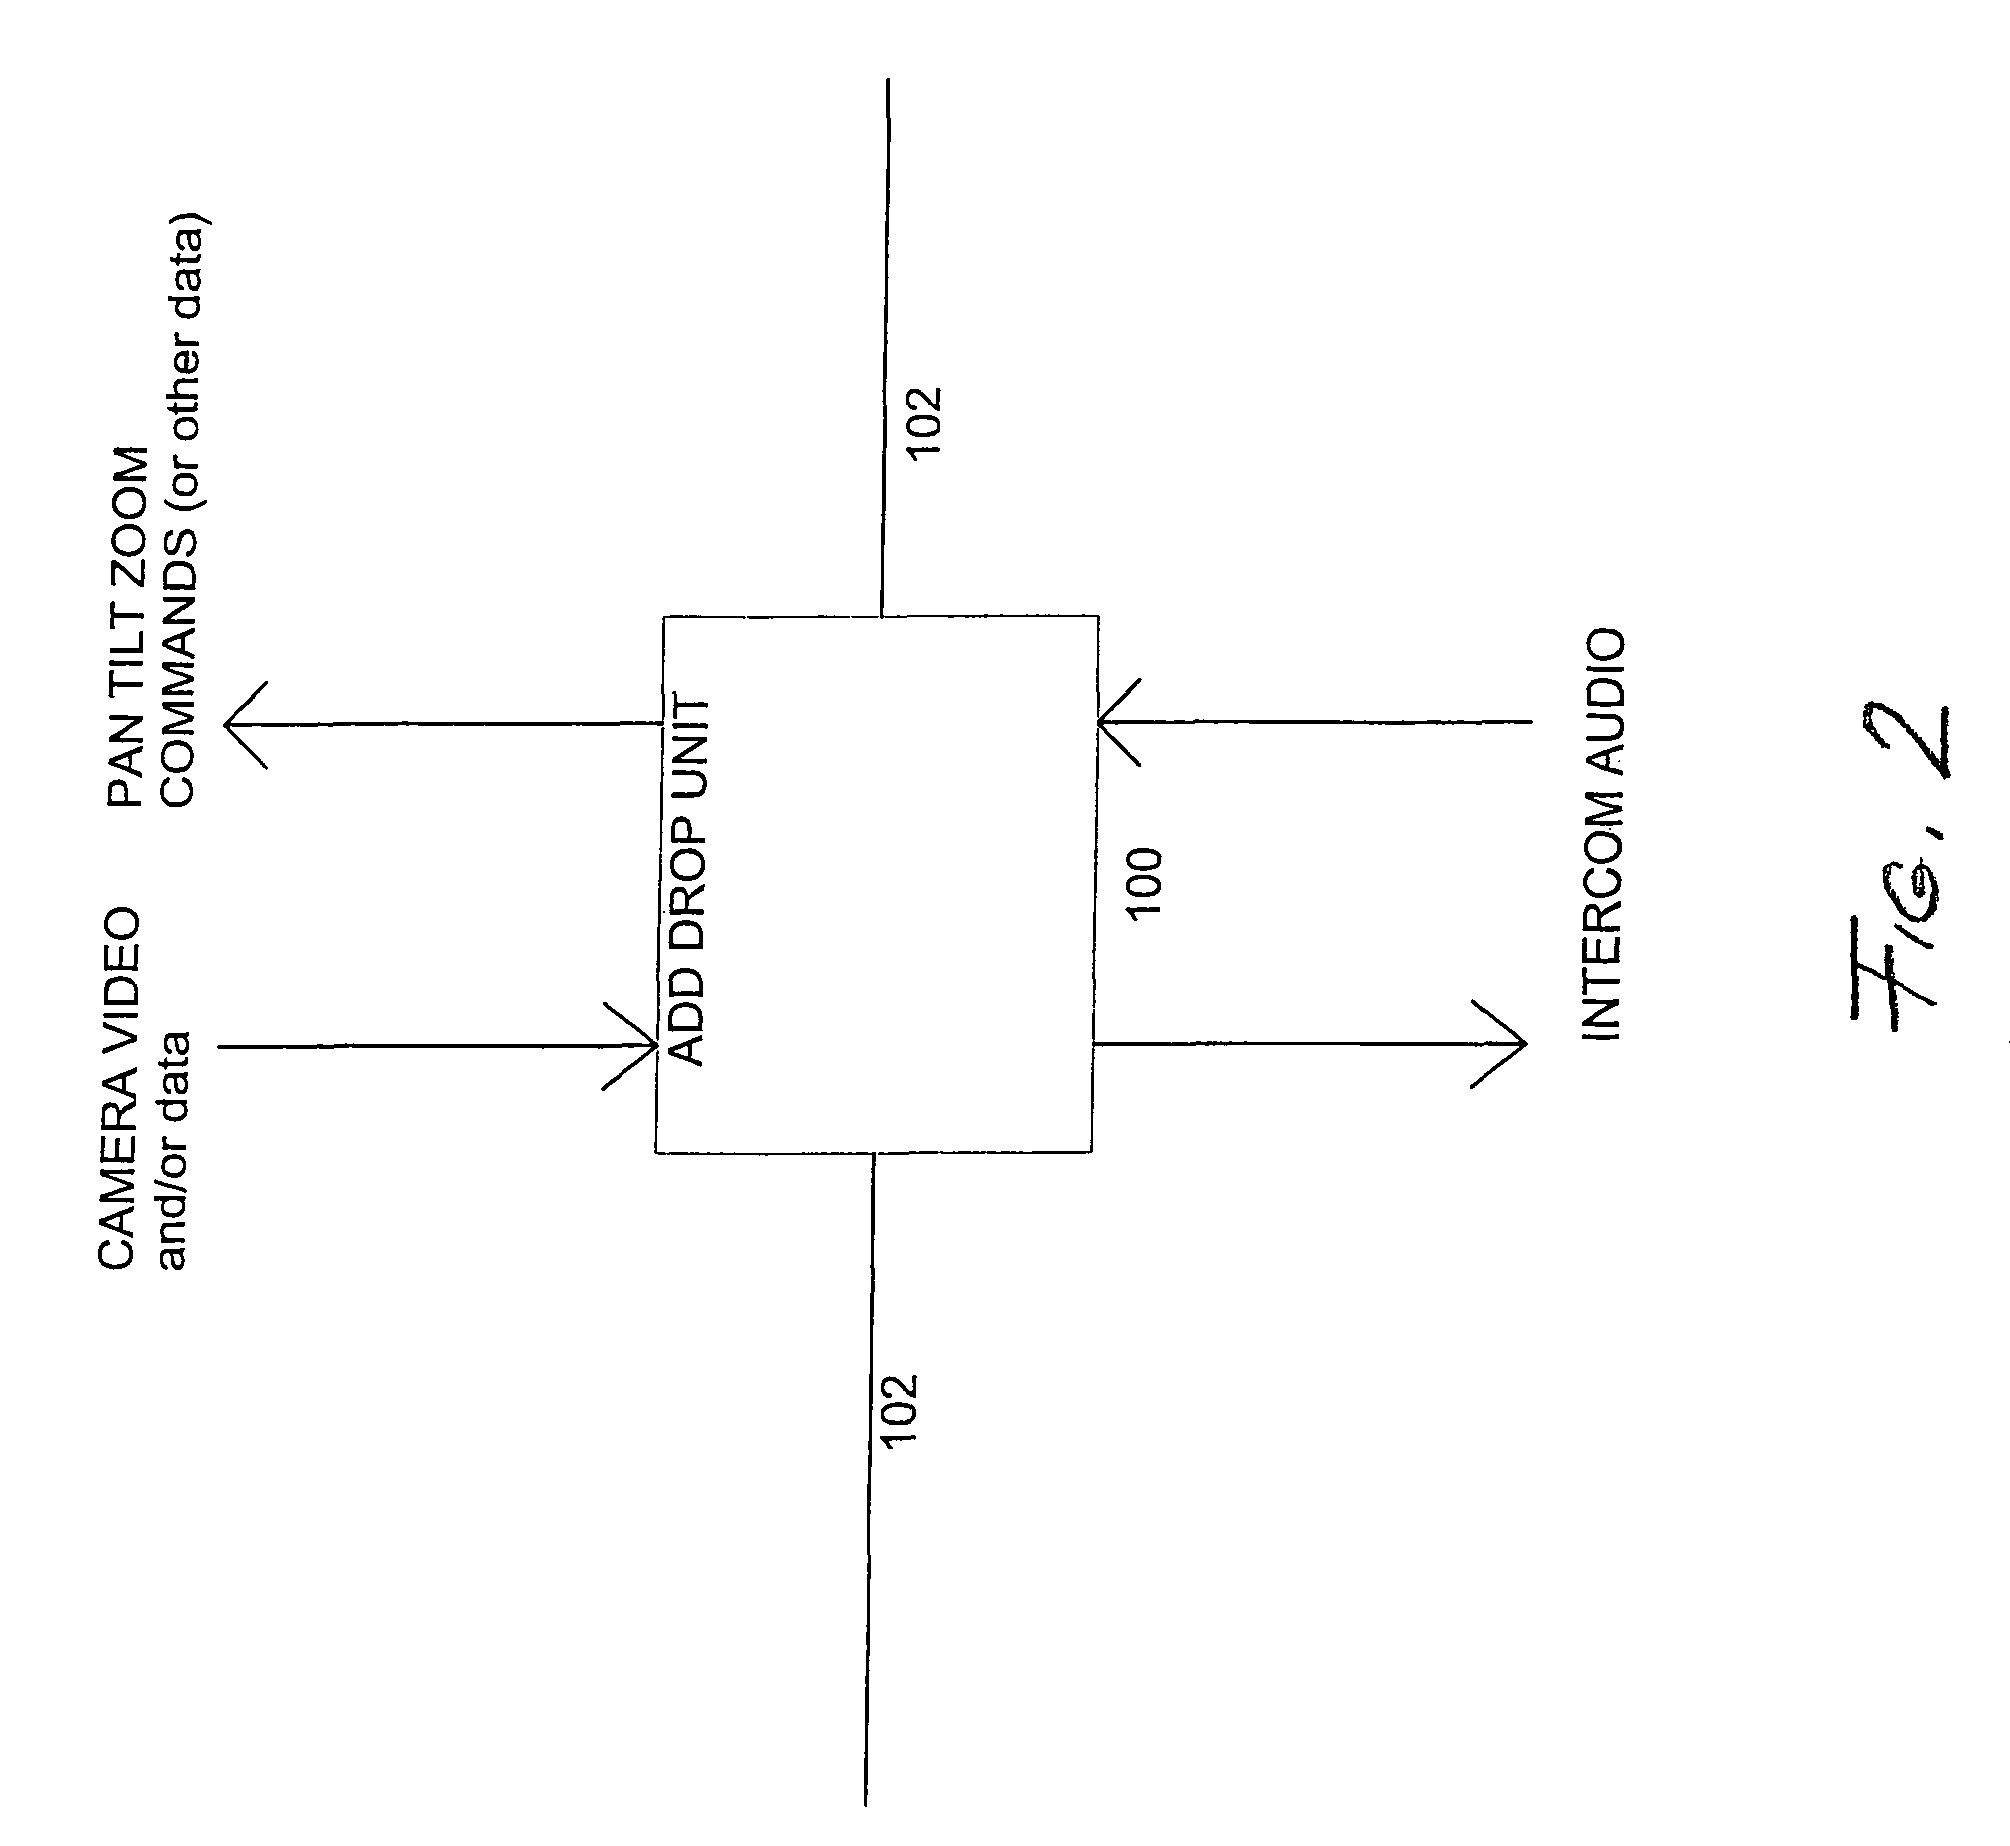 System for communication of video, audio, data, control or other signals over fiber in a self-healing ring topology